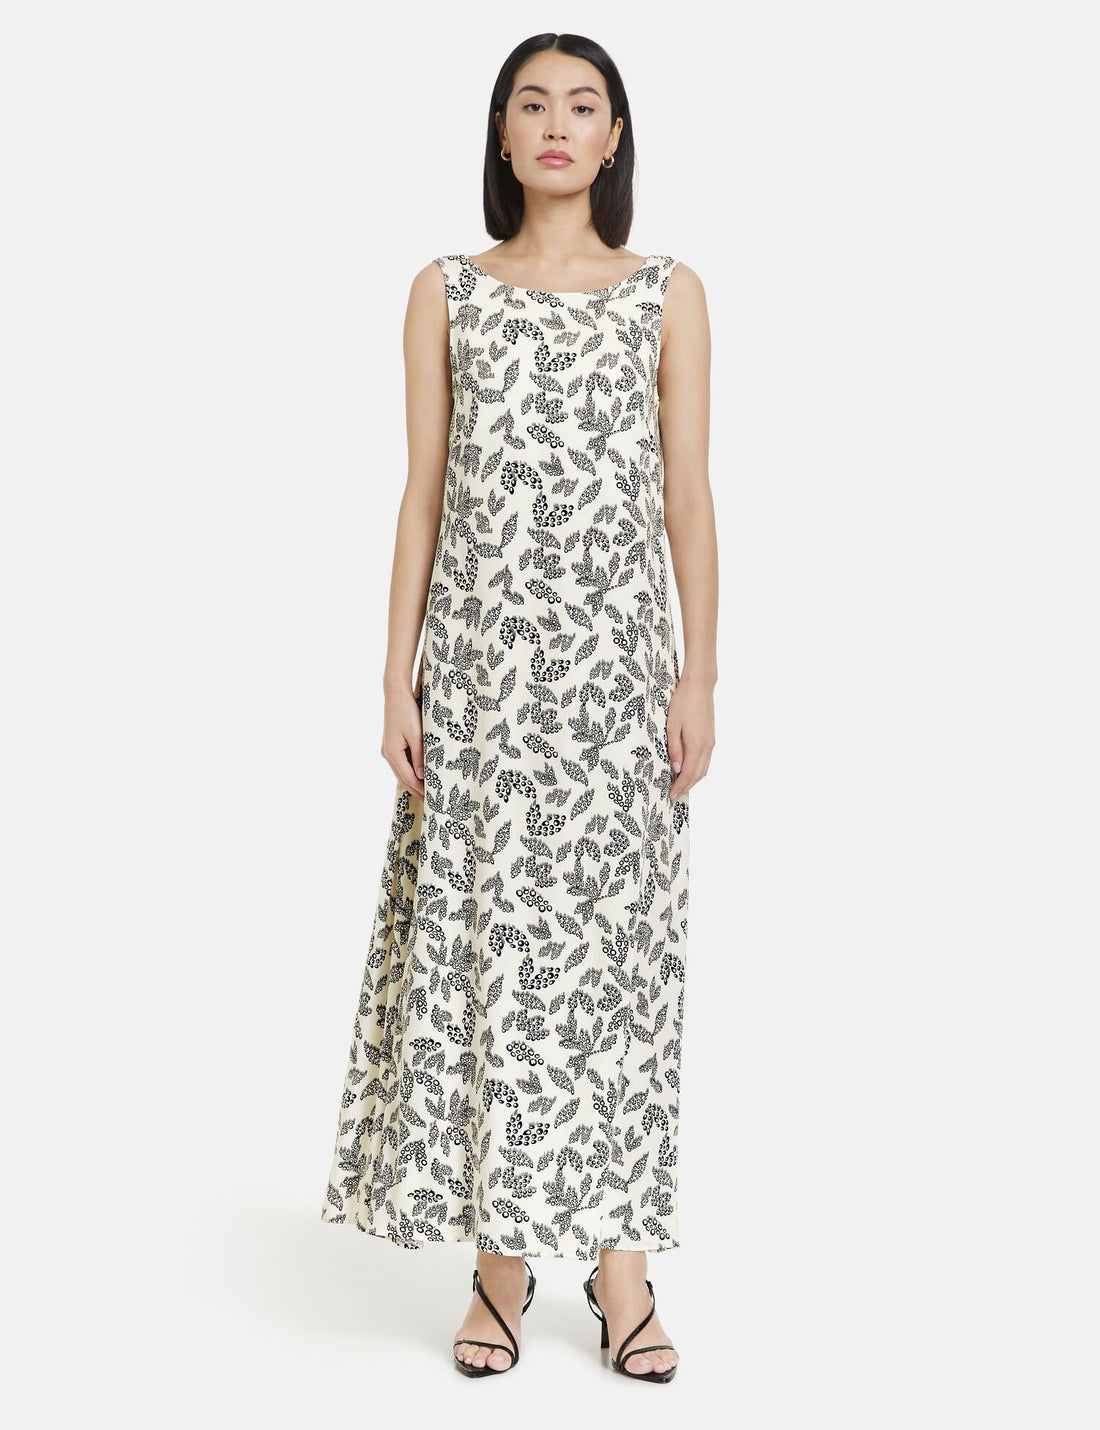 Sleeveless Maxi Dress With A Cut-Out At The Back_580330-11110_9452_01